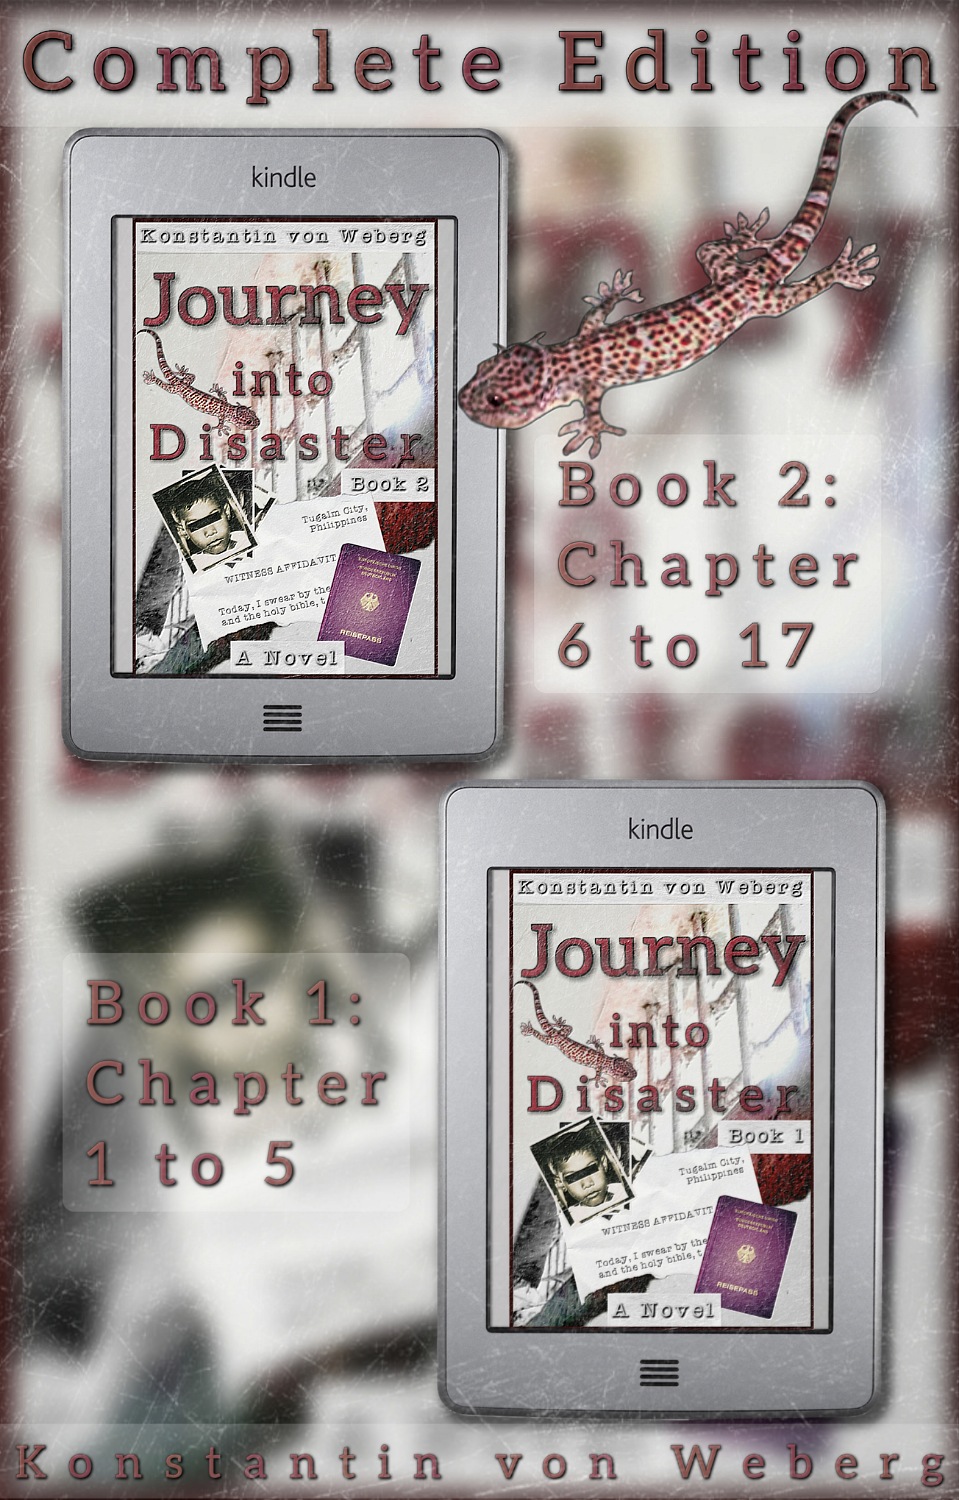 Complete Kindle Ebook Edition of ‚Journey into Disaster‘ on Amazon